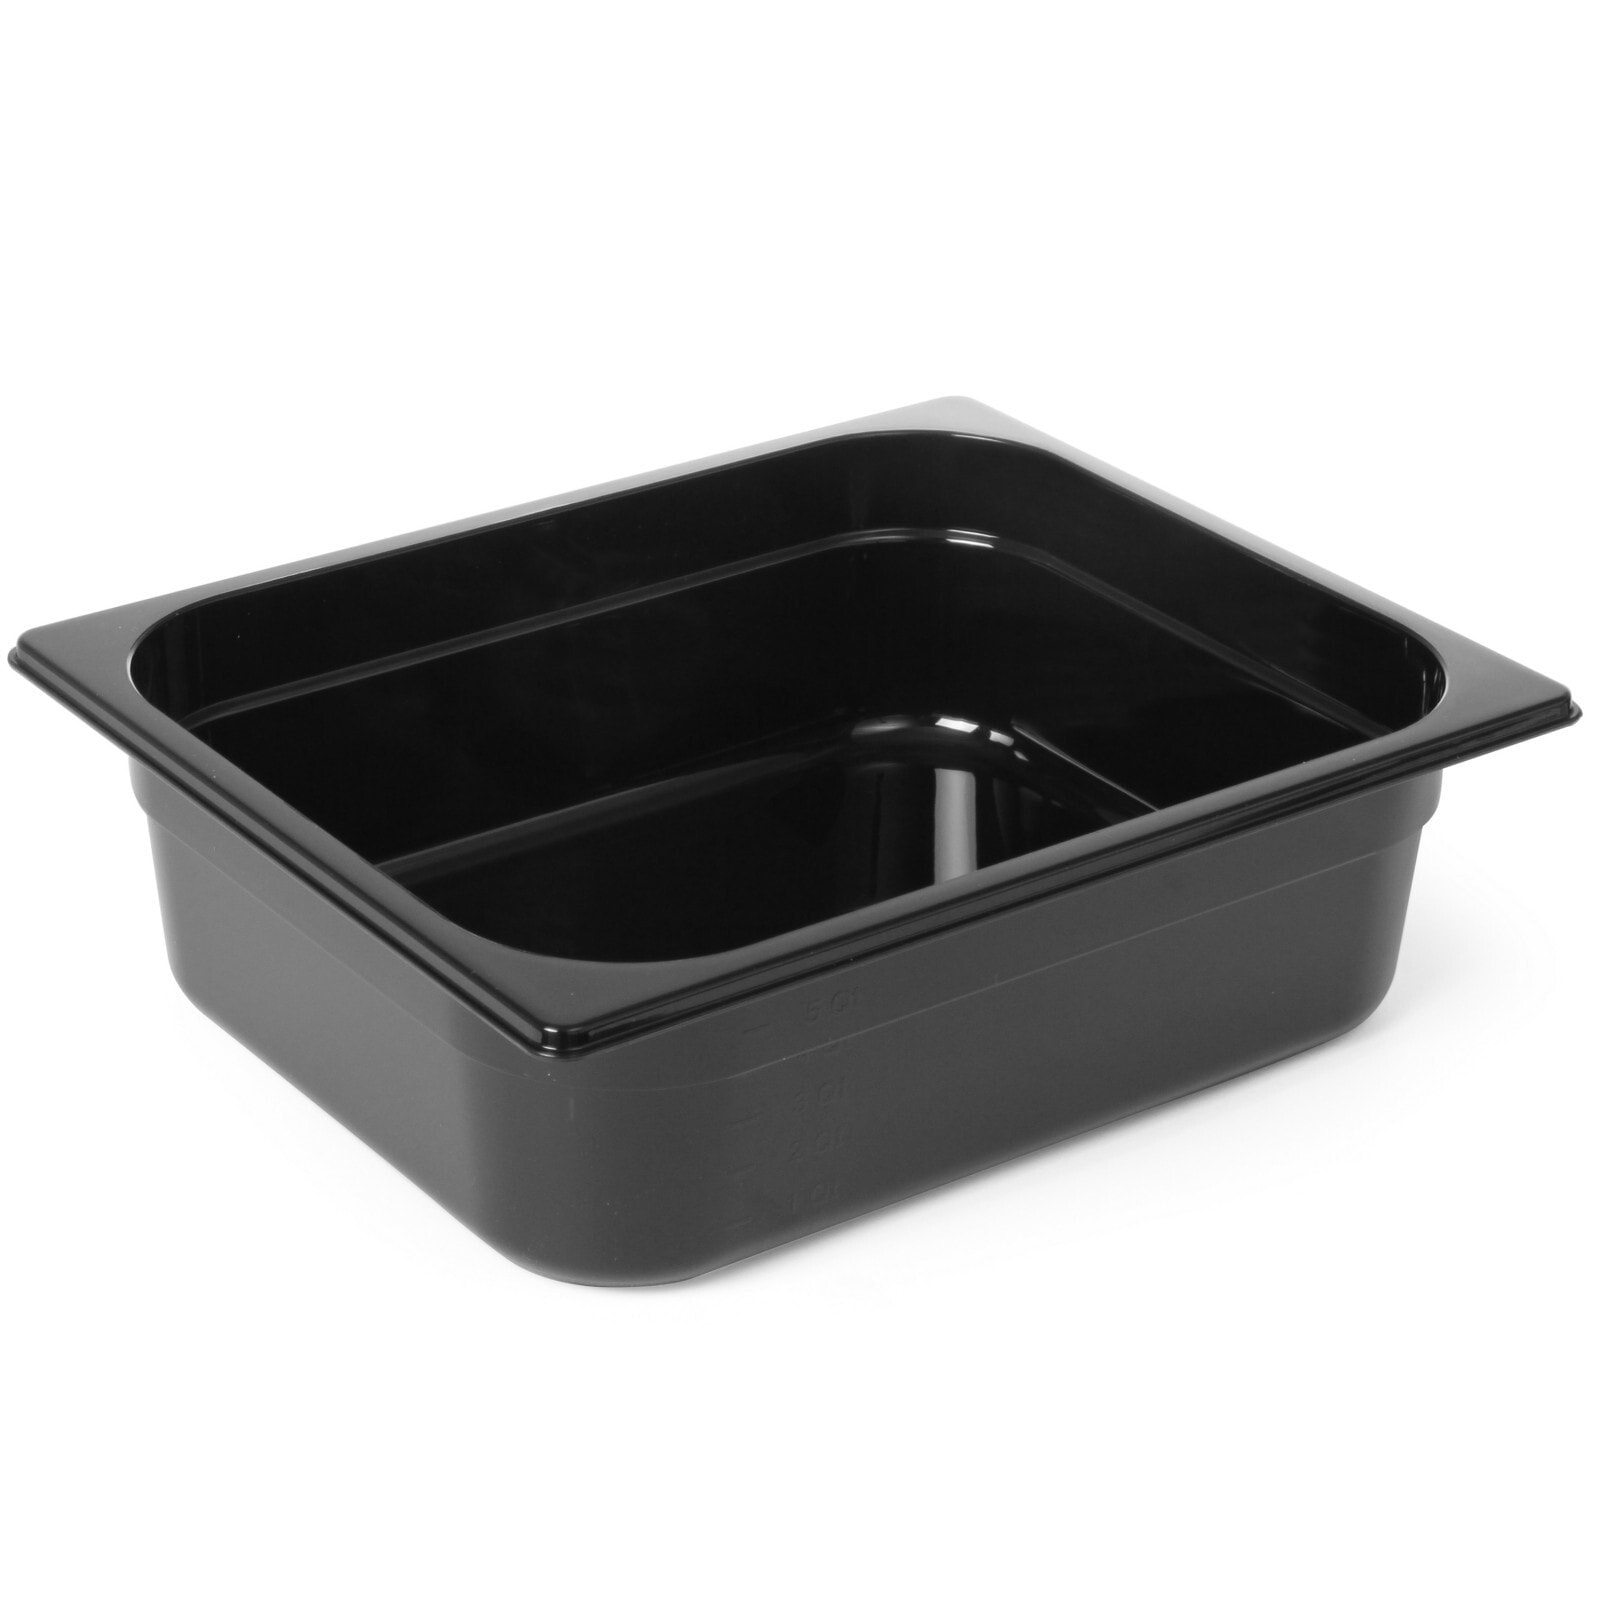 Gastronomy container GN 1/2, black polycarbonate 325x265x150mm 9.5L Hendi 862414